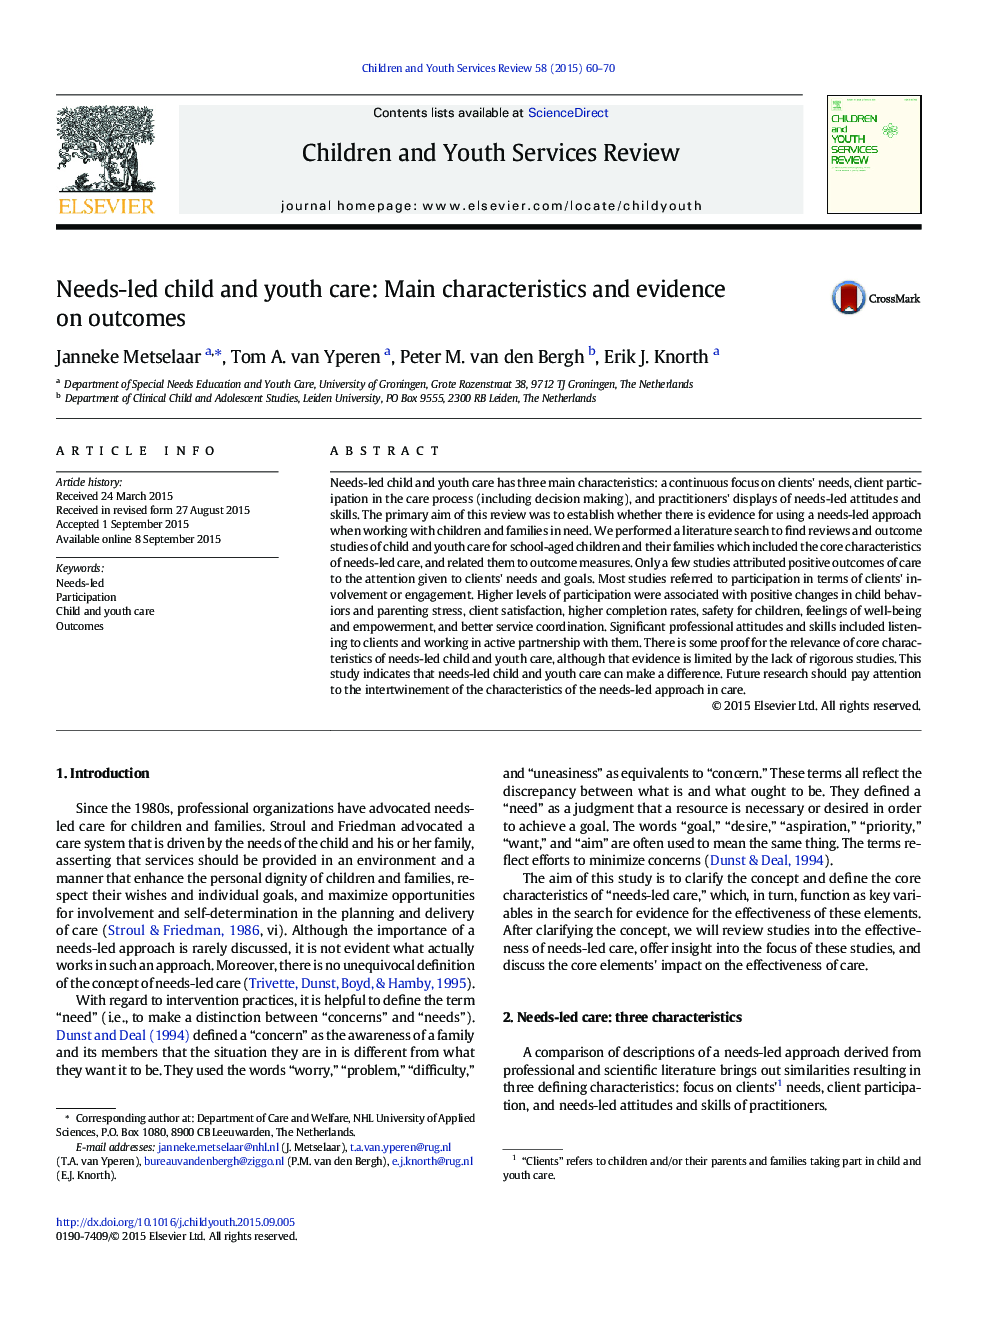 Needs-led child and youth care: Main characteristics and evidence on outcomes